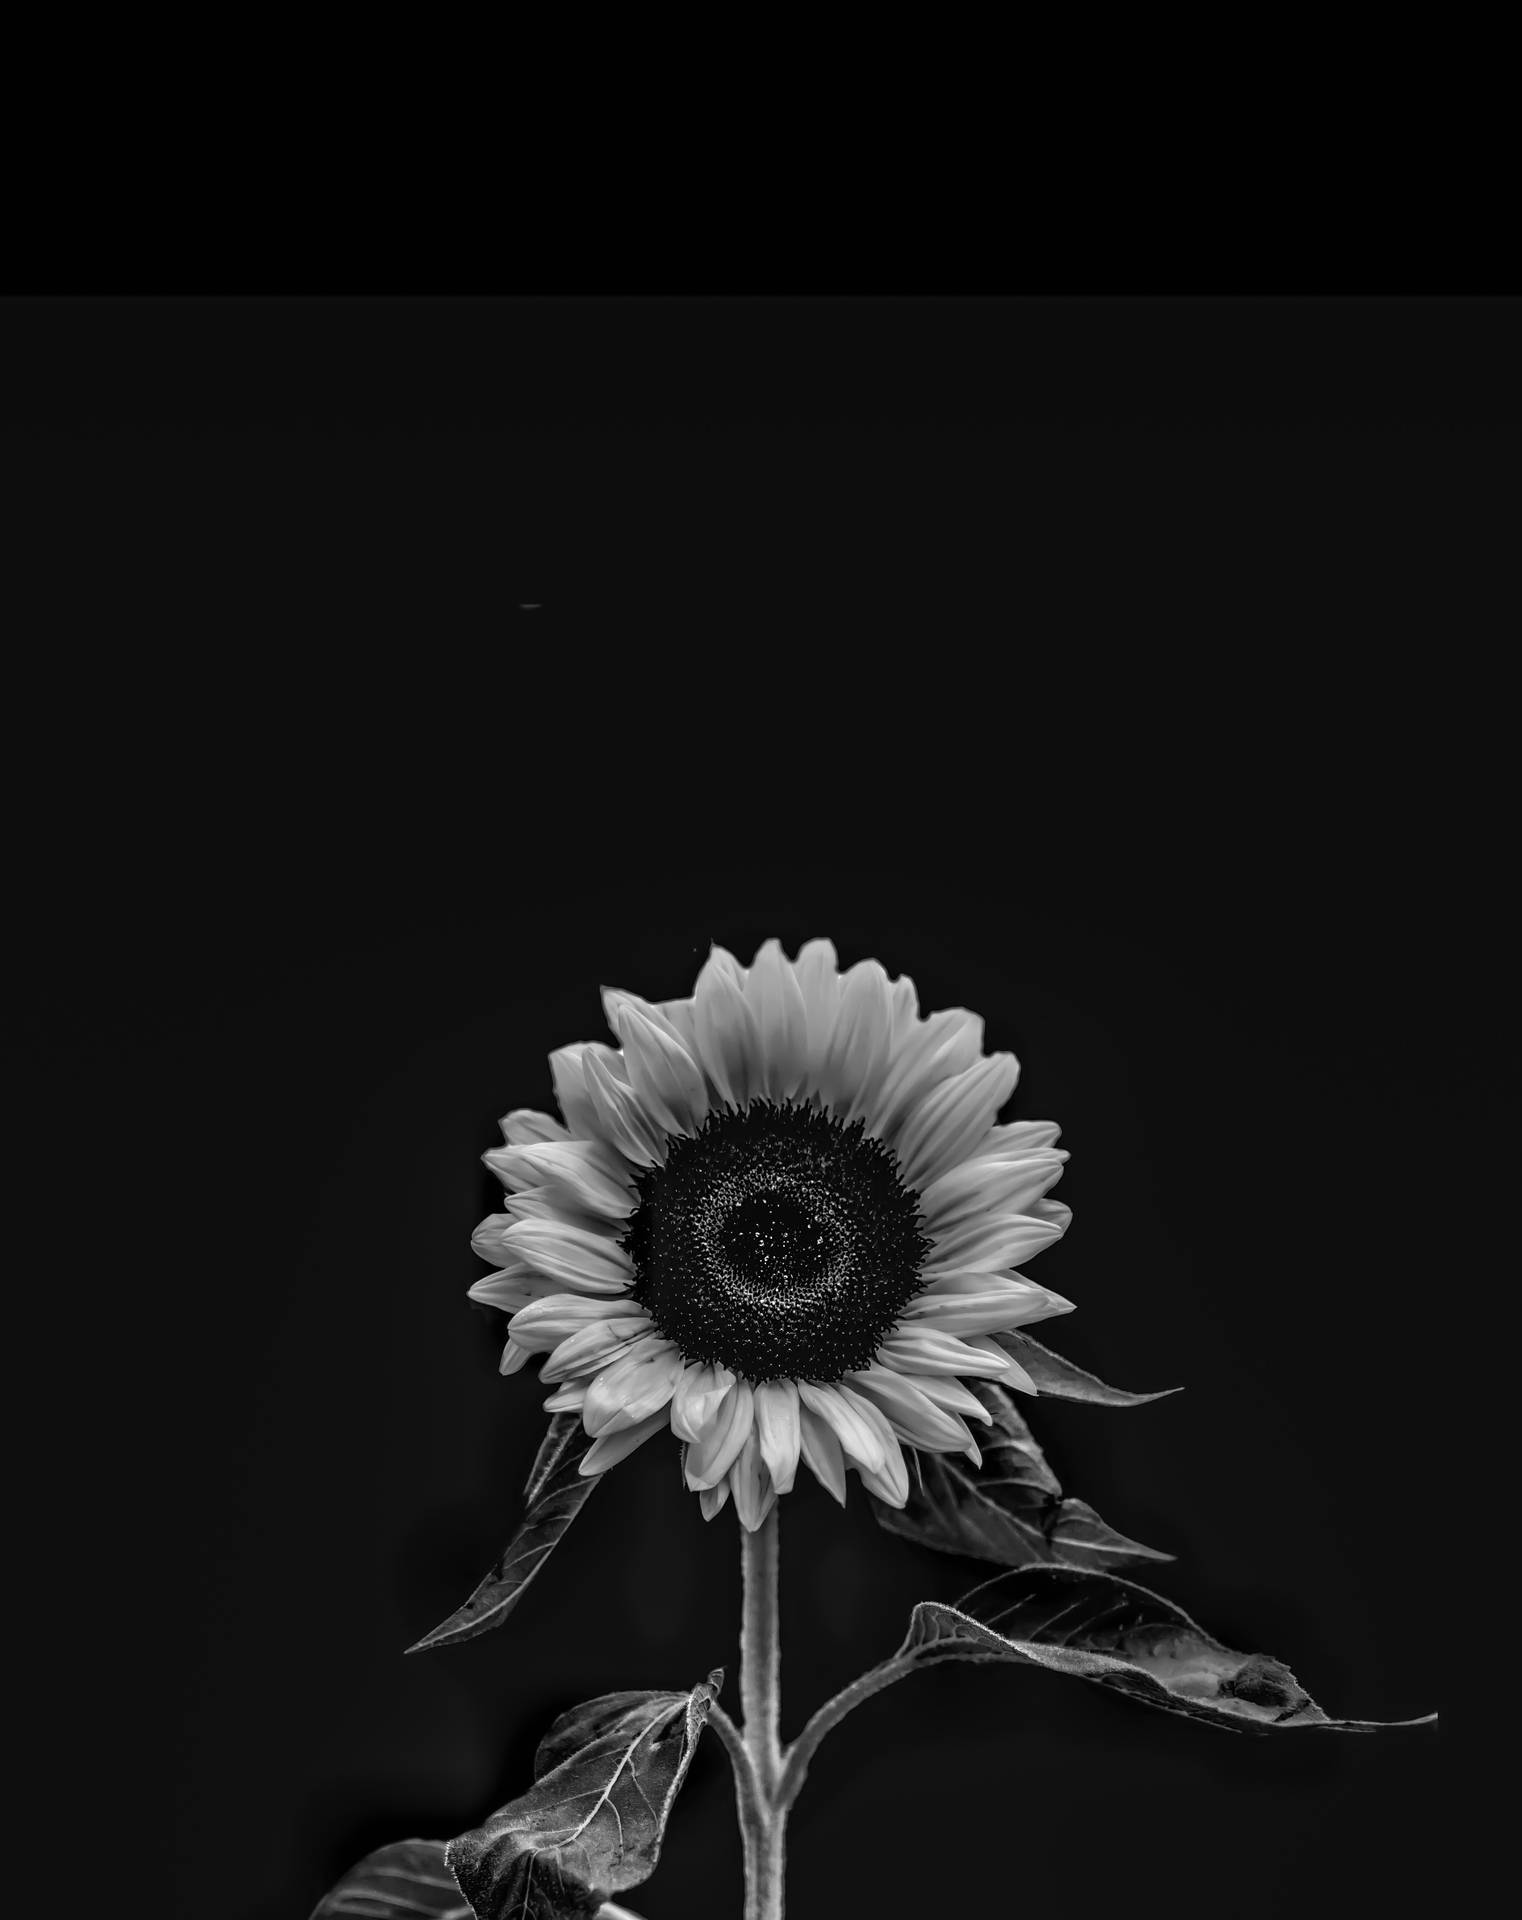 Remarkable 4k Iphone Wallpaper Featuring A Black And White Sunflower Wallpaper